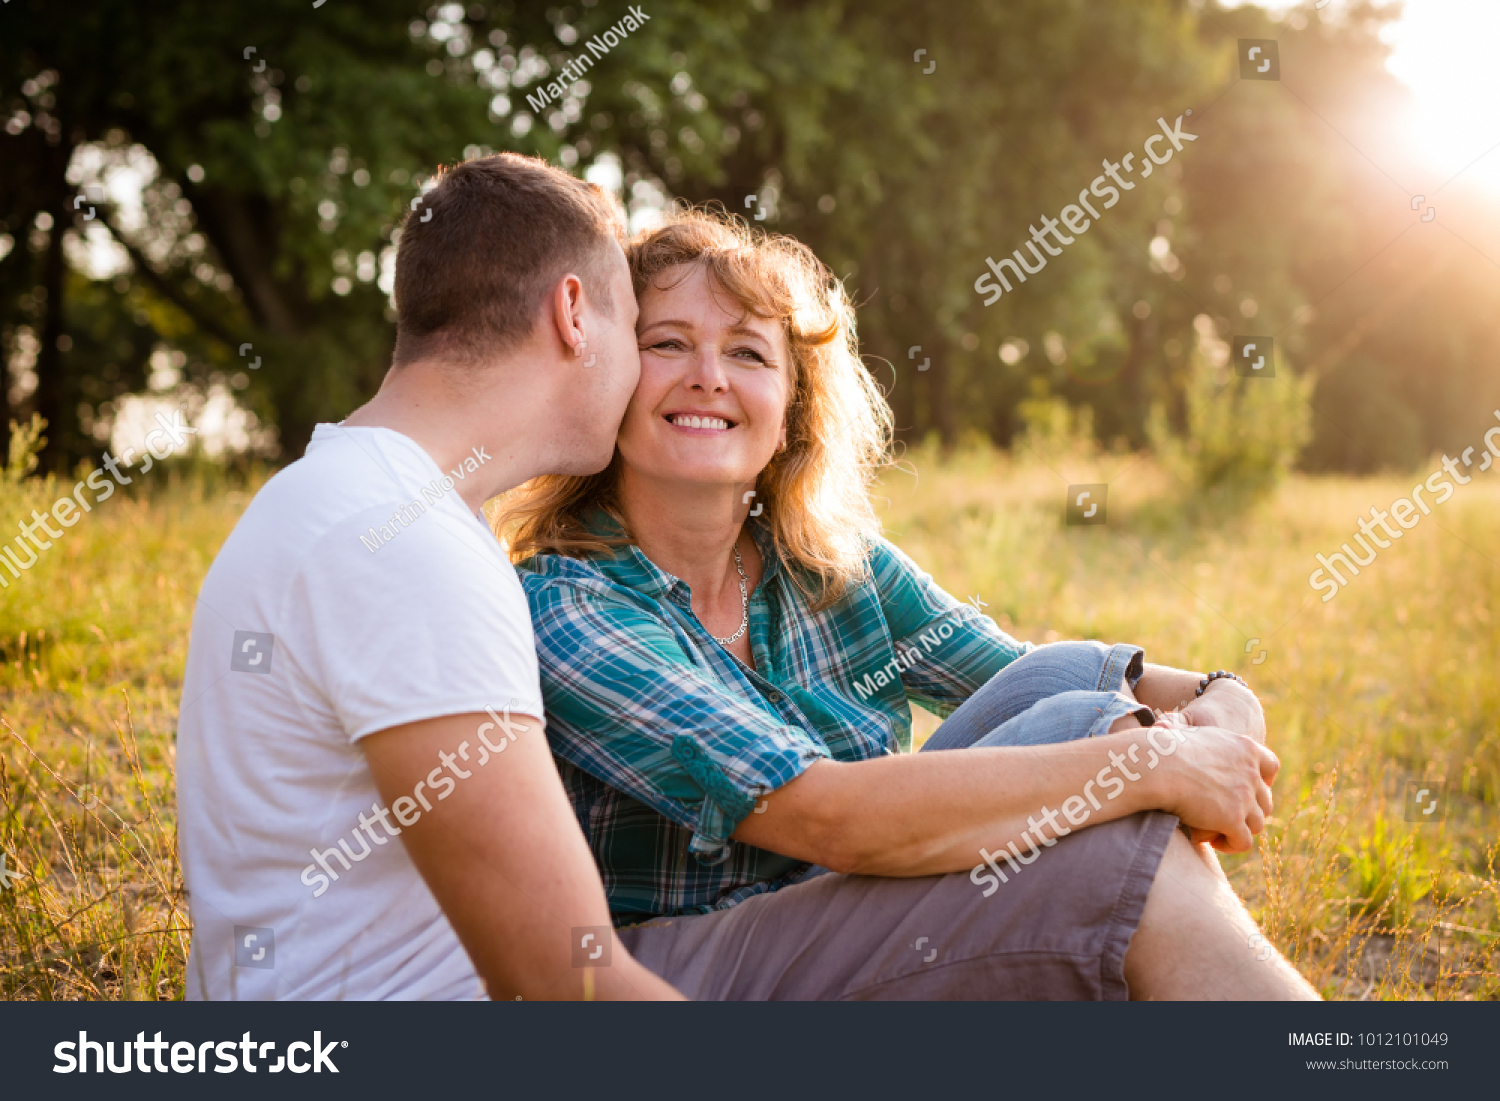 Smiling Mature Woman Being Kissed By photo